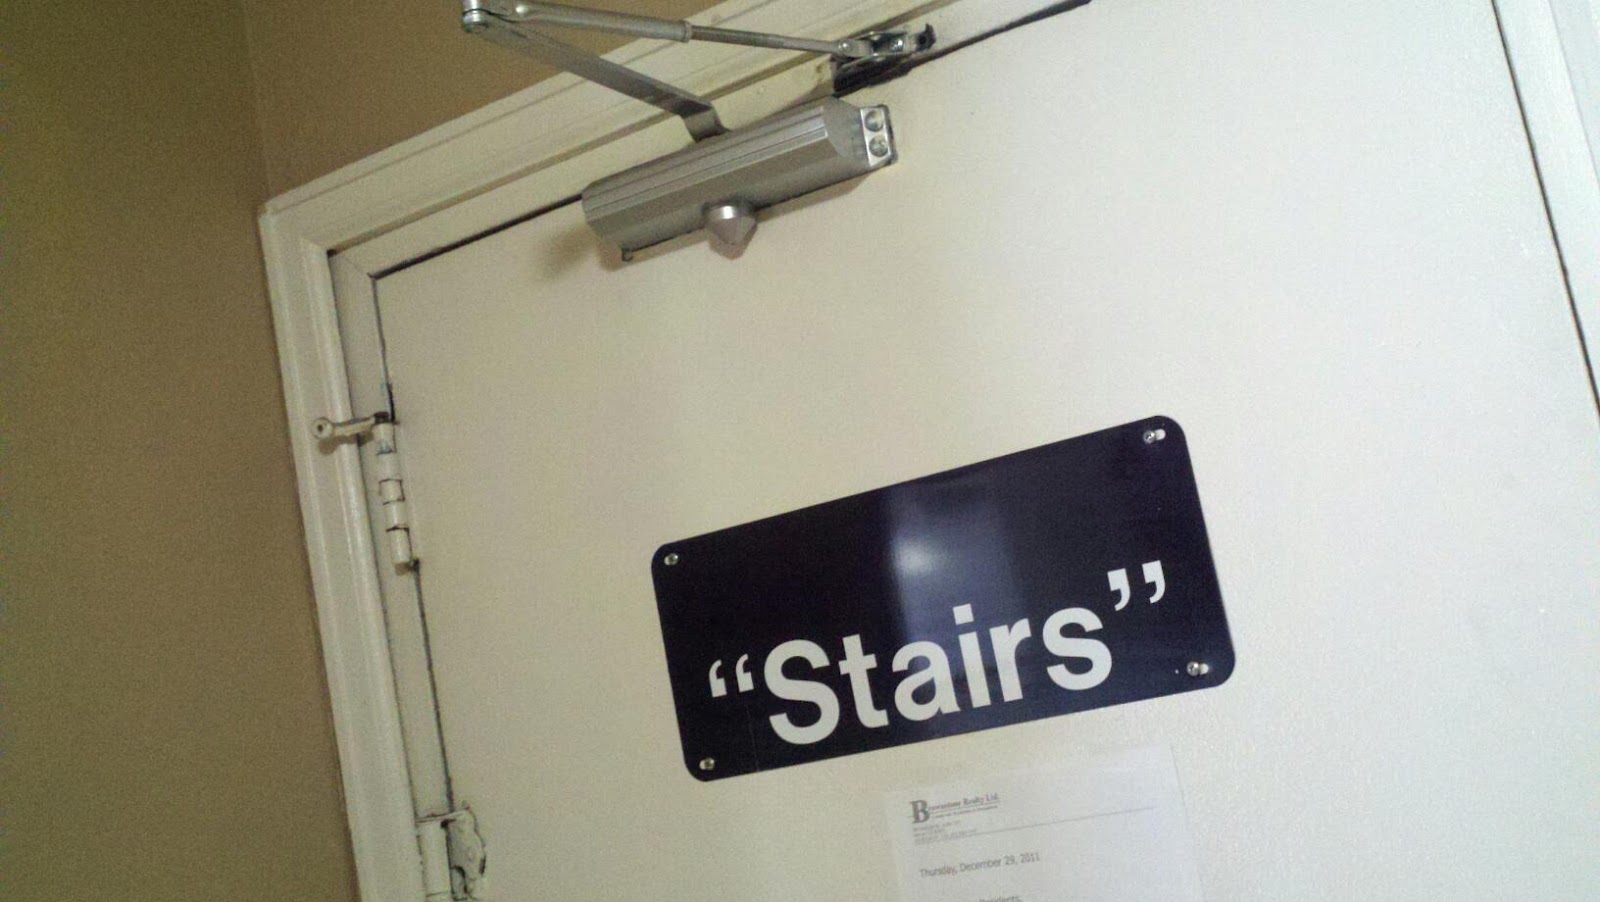 stairs in quotation marks - Stairs". Thursday,